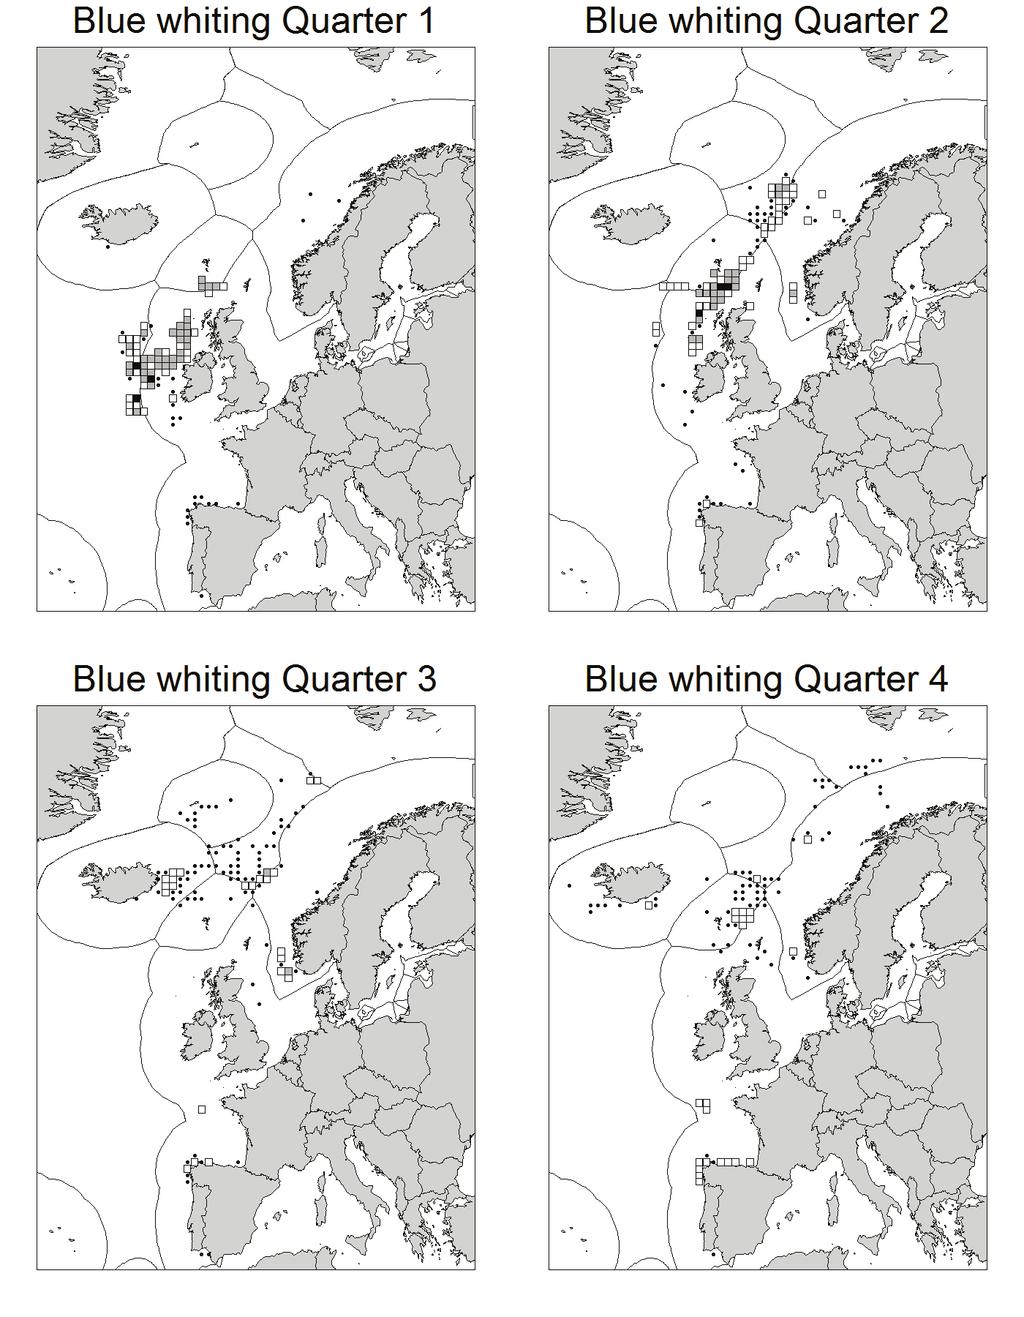 ICES WGWIDE REPORT 20133 459 Figure 8.2.3. Blue whiting total catches (t) in 2012 by quarter and ICES rectangle.